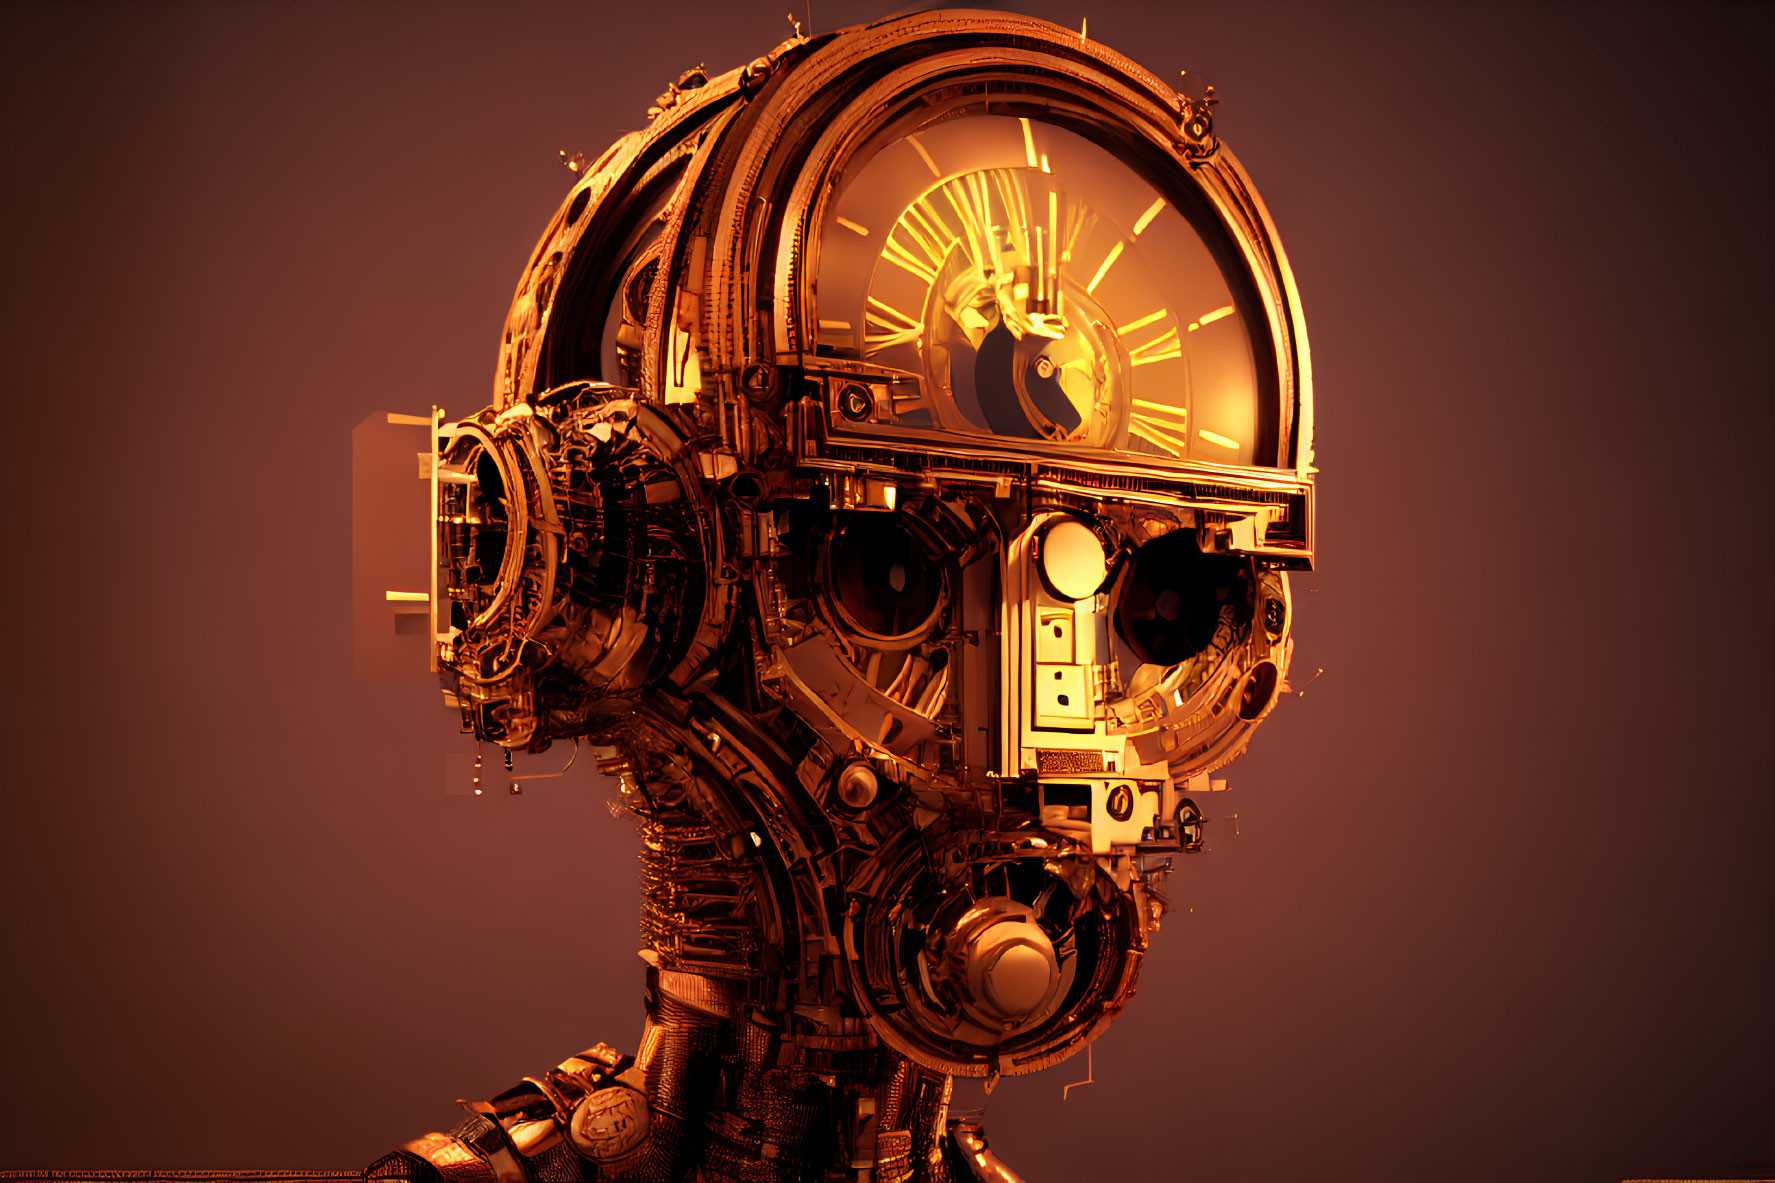 Detailed 3D mechanical head profile with gears and metallic components on dark background